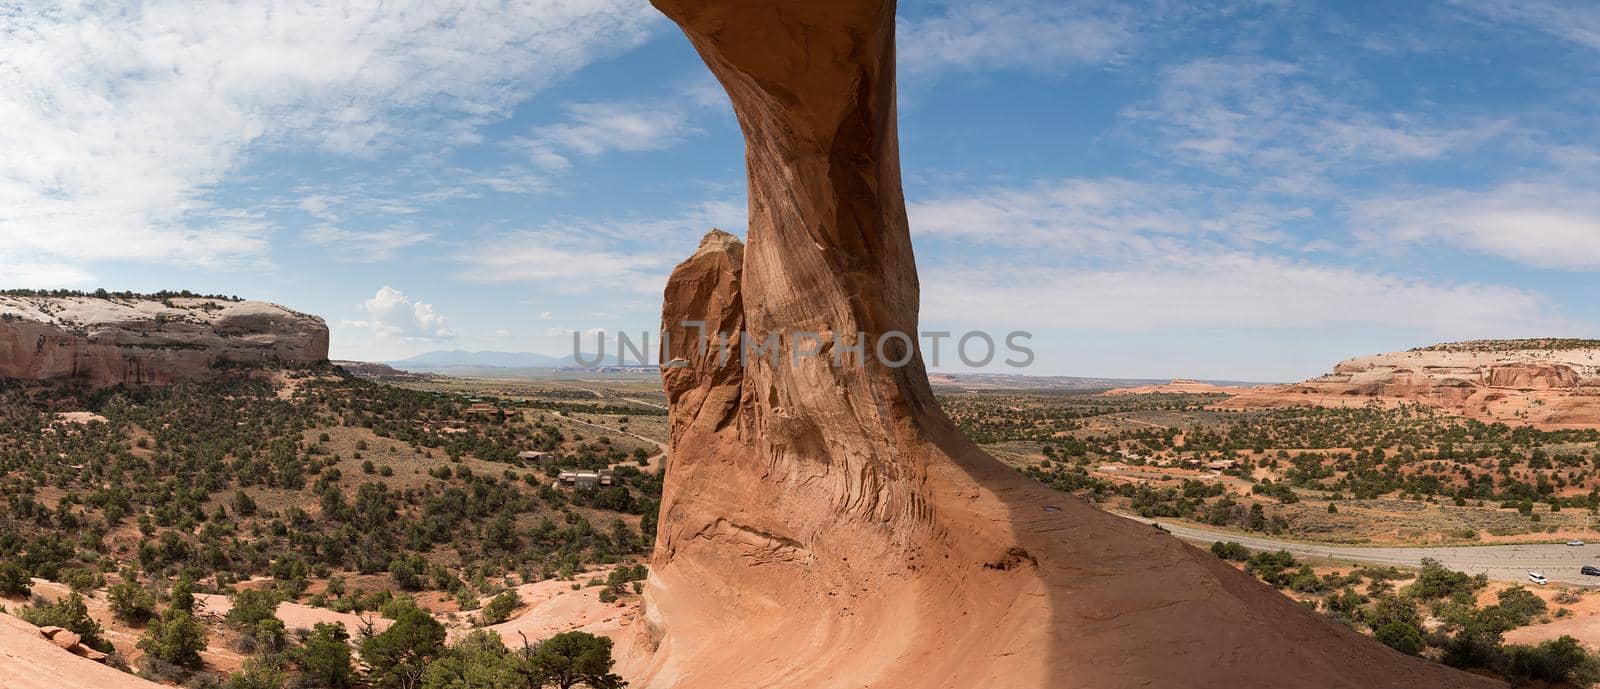 Utah panorama of inside of giant arch arm by jyurinko